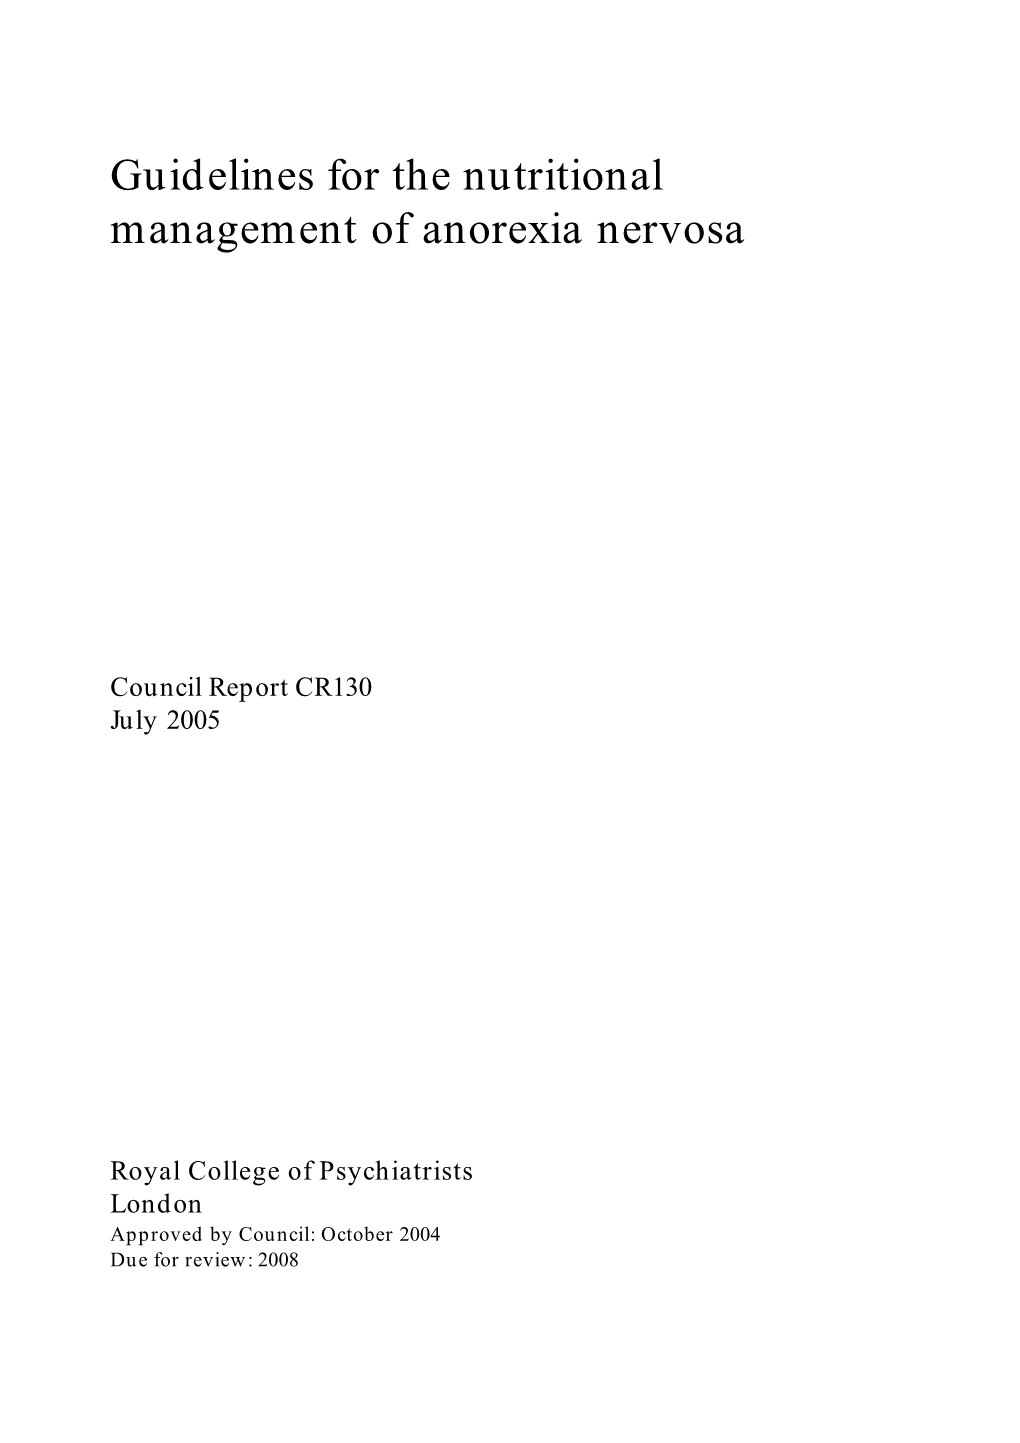 Guidelines for the Nutritional Management of Anorexia Nervosa